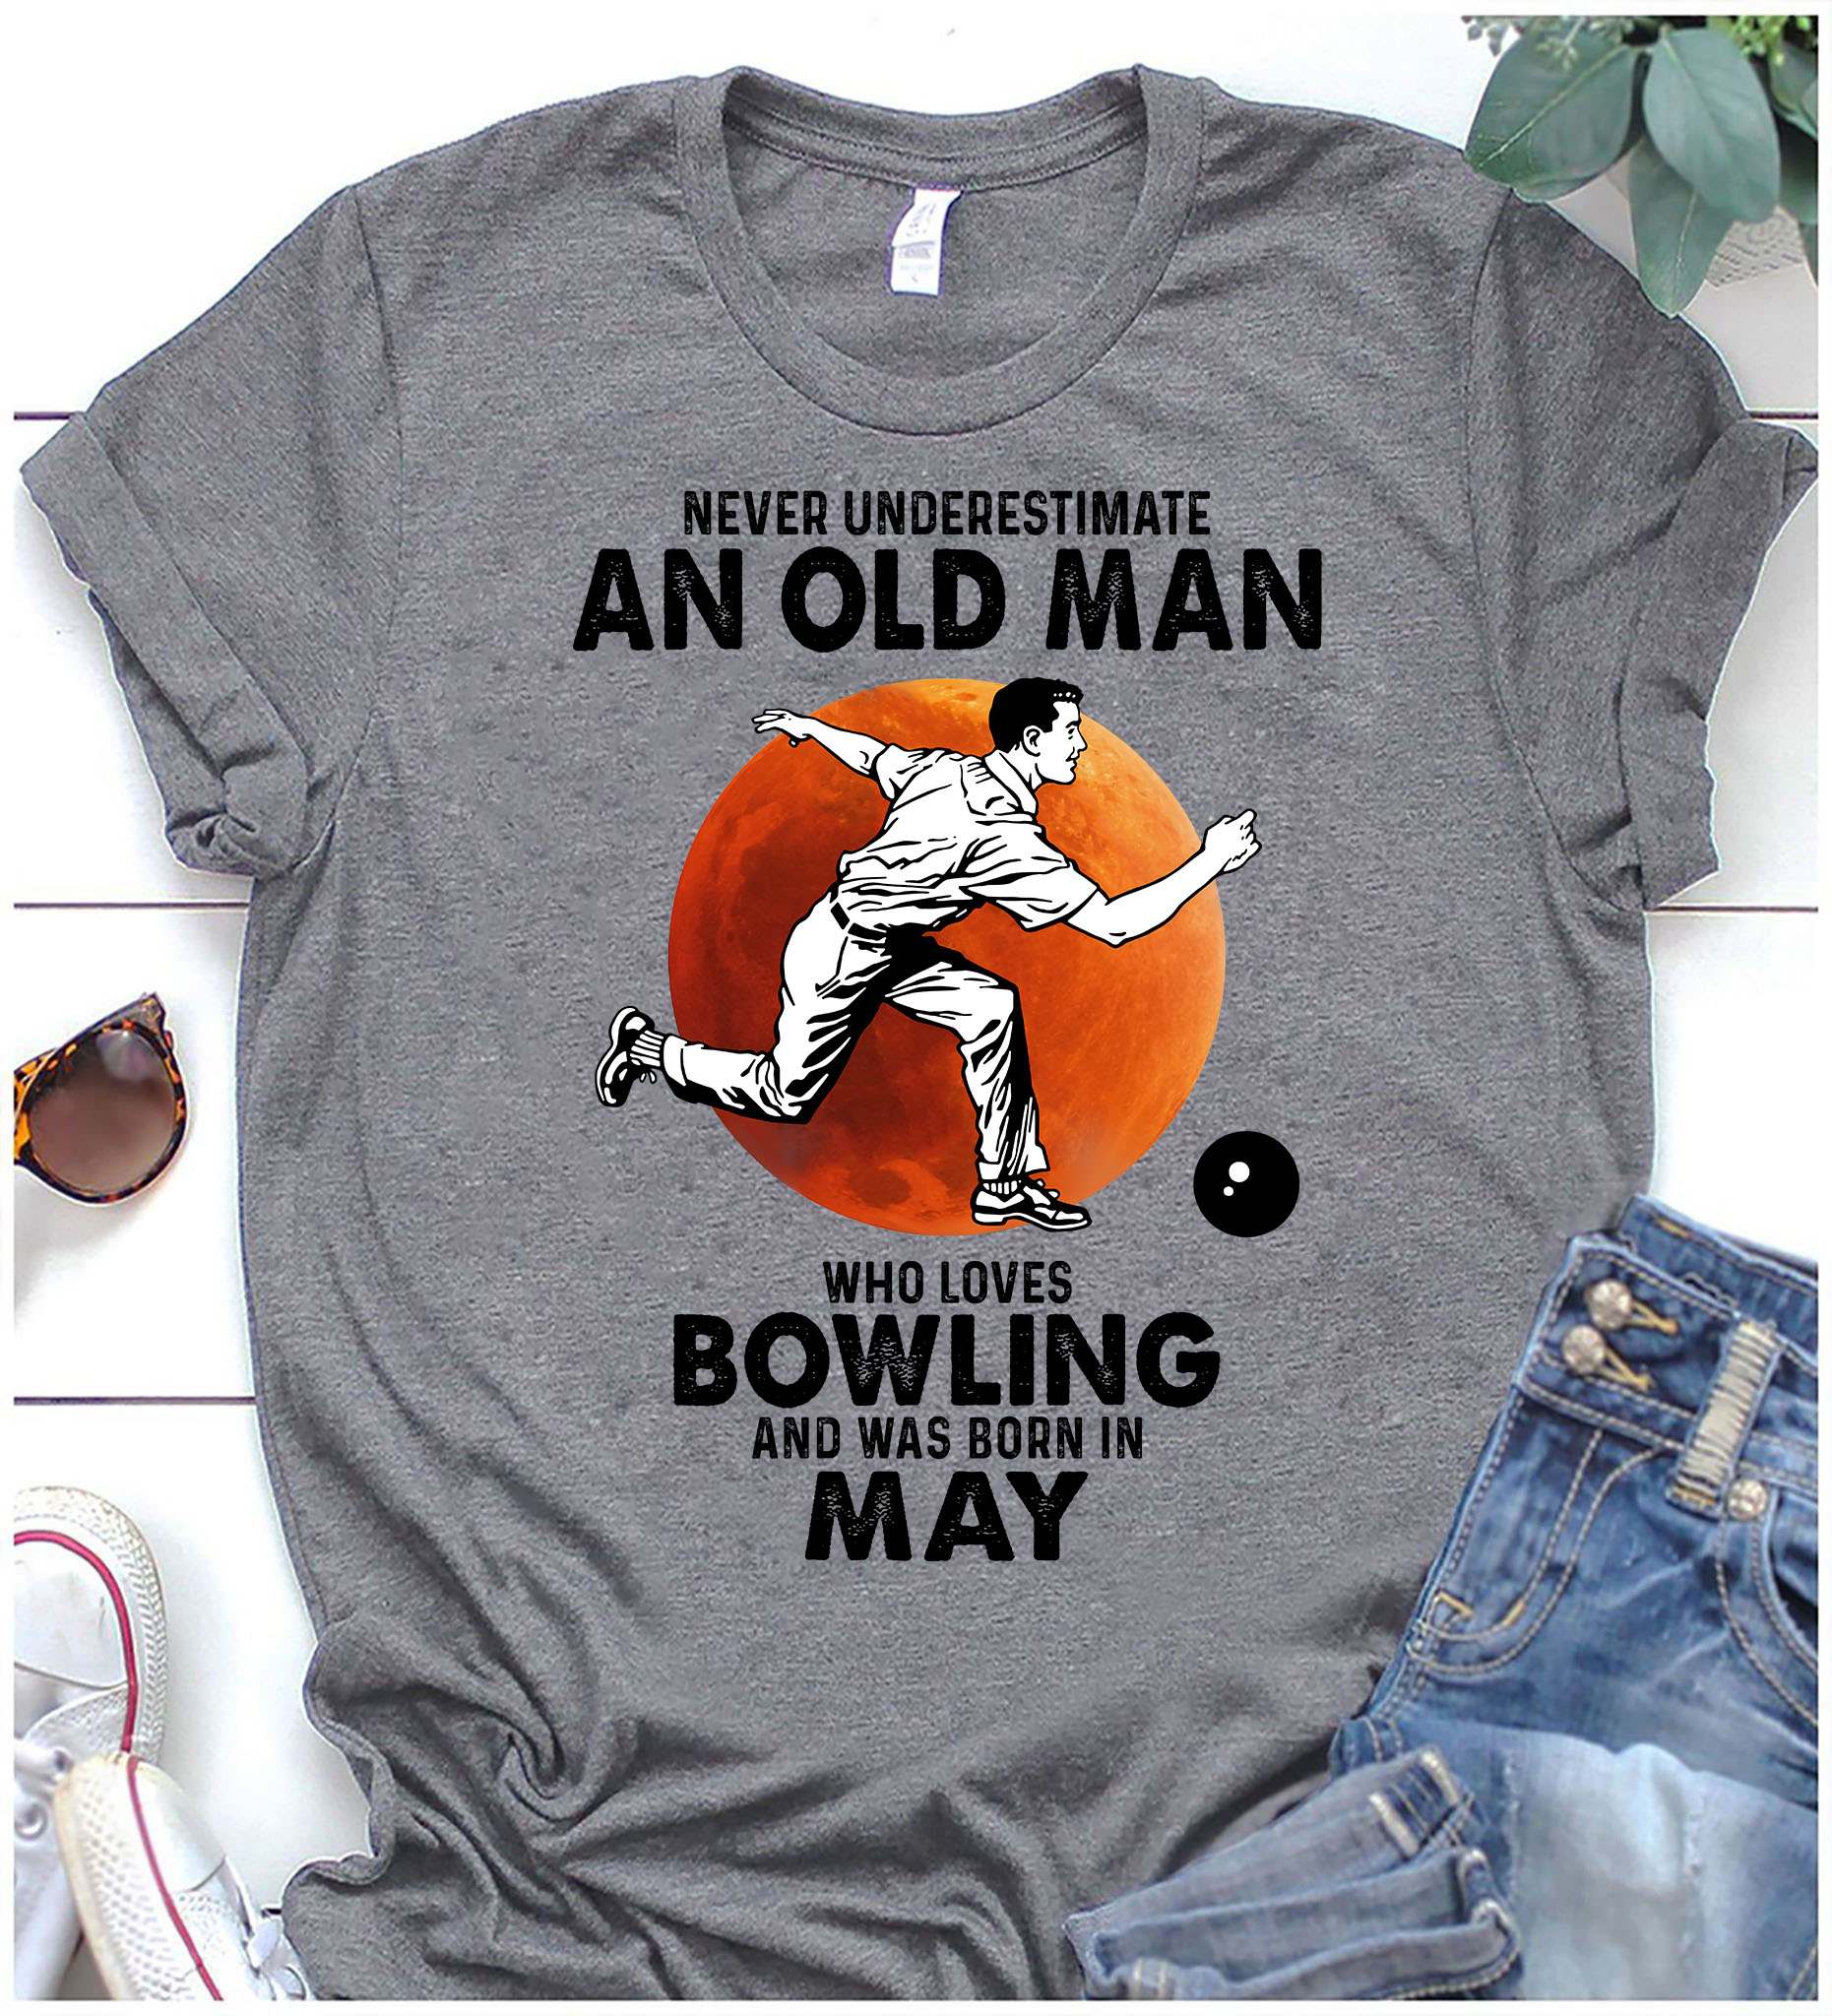 Never underestimate an old man who loves bowling and was born in May